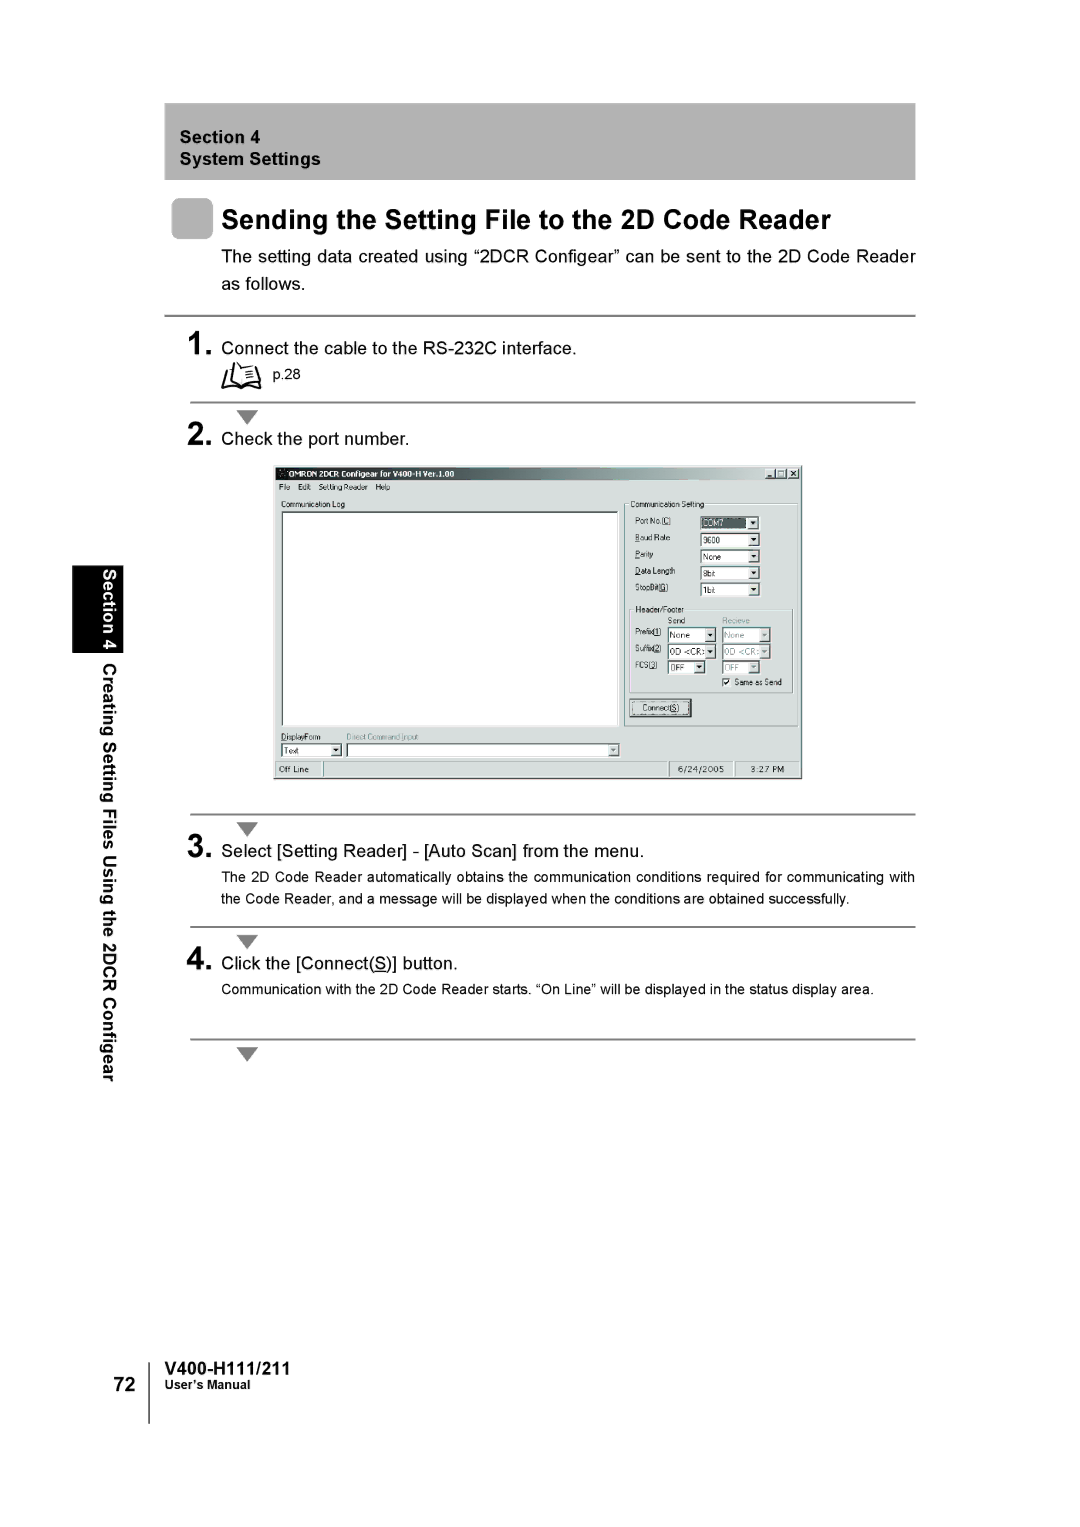 Omron V400-H111 user manual Sending the Setting File to the 2D Code Reader, Click the ConnectS button 